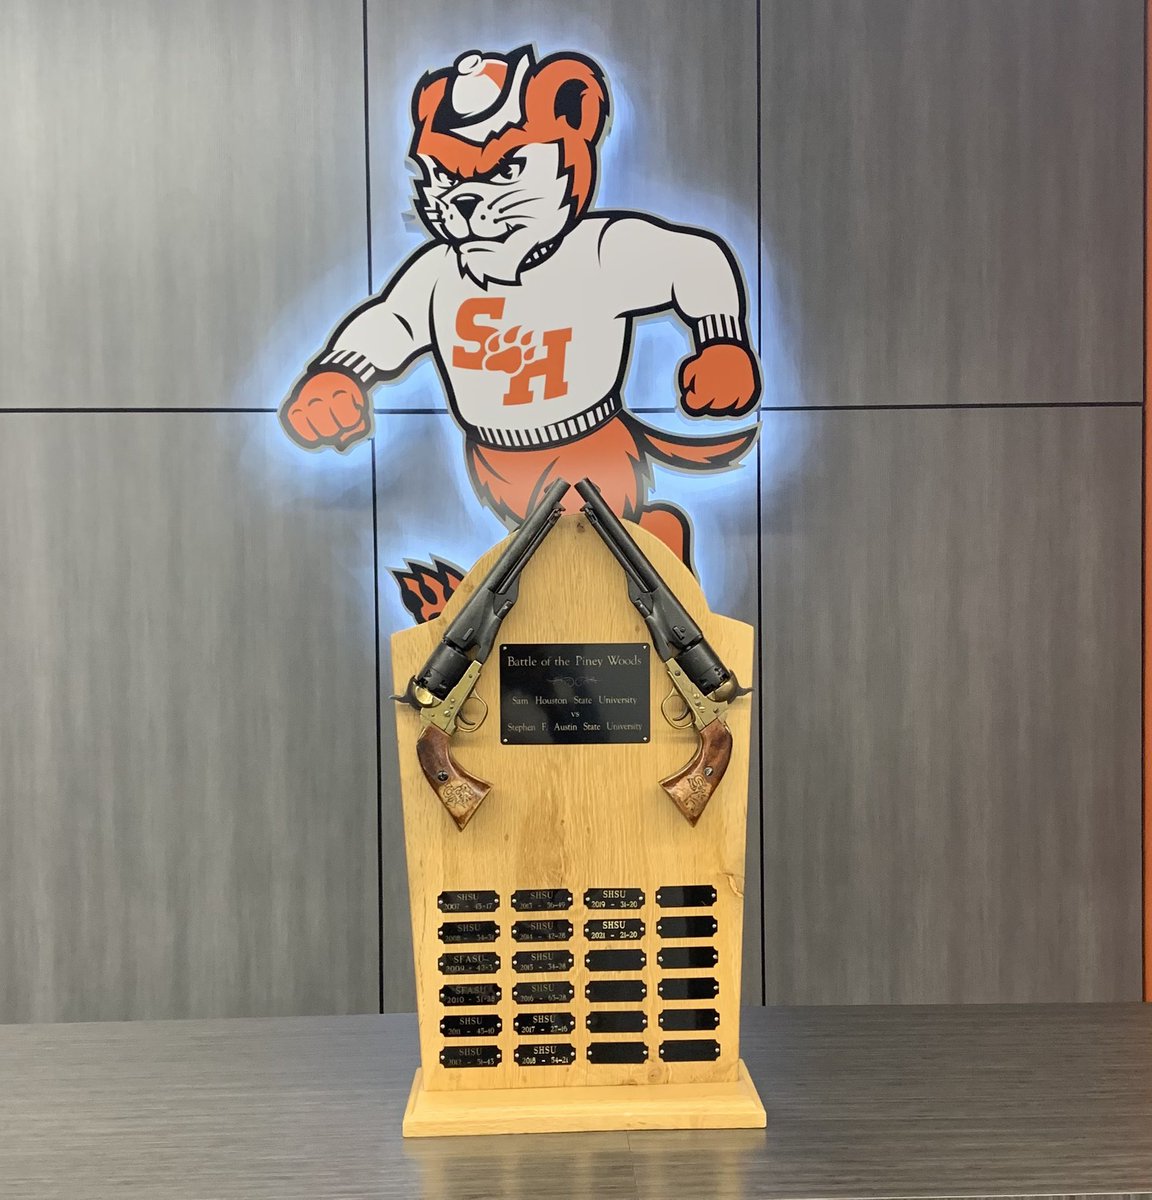 Just in case yall forgot the @BOTPW trophy is in Huntsville forever! #SwarmNCompete #EatEmUpKats